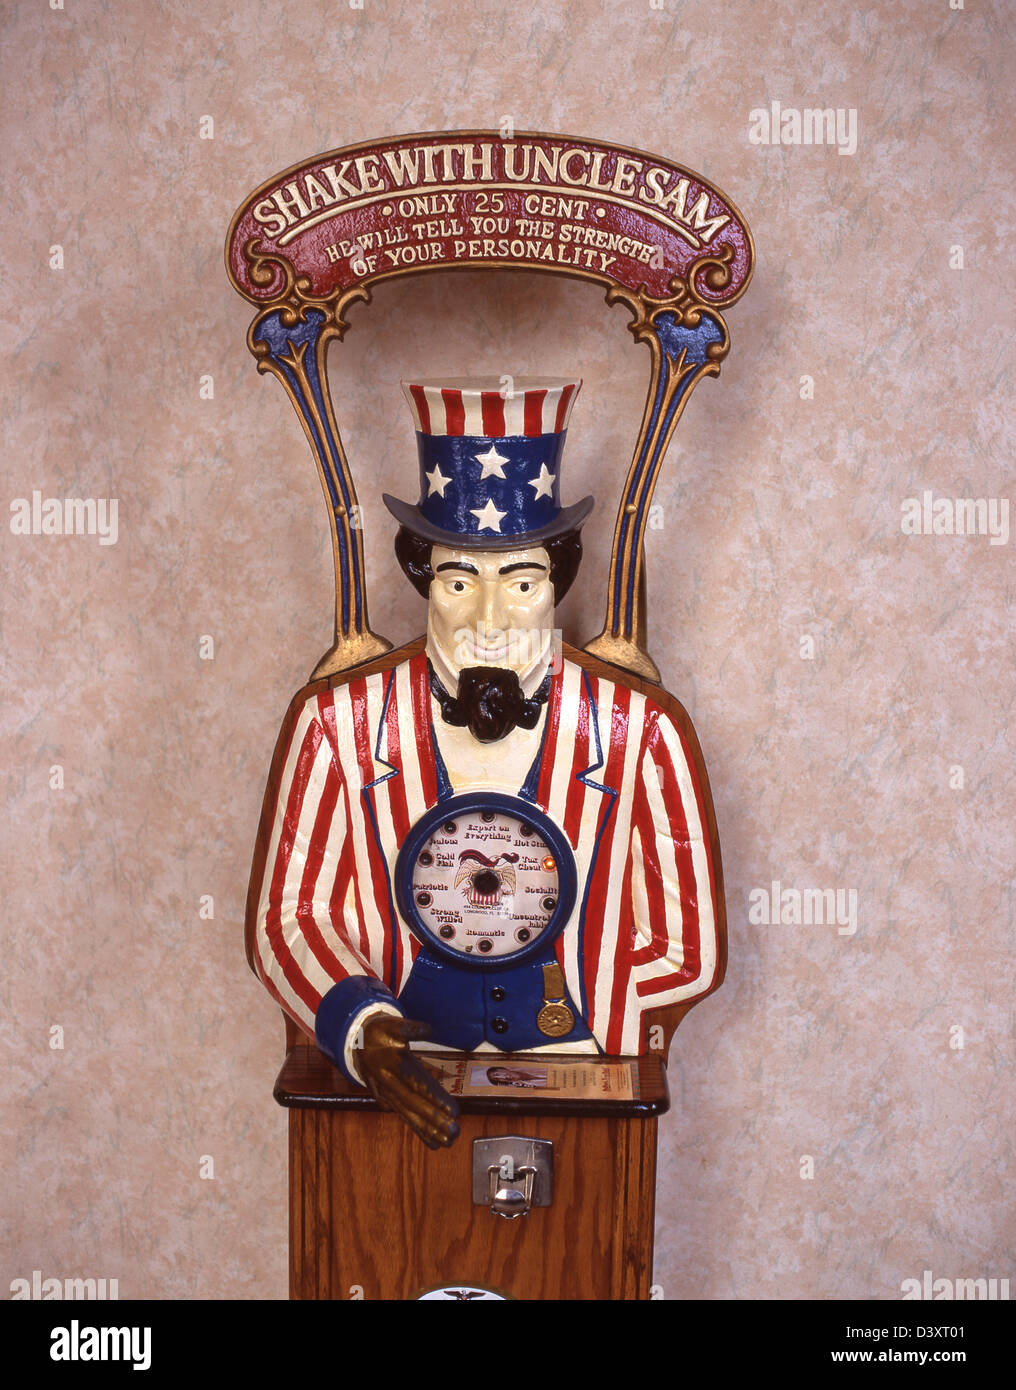 Vintage coin-operated personality reader machine, Hollywood, Los Angeles, California, United States of America Stock Photo